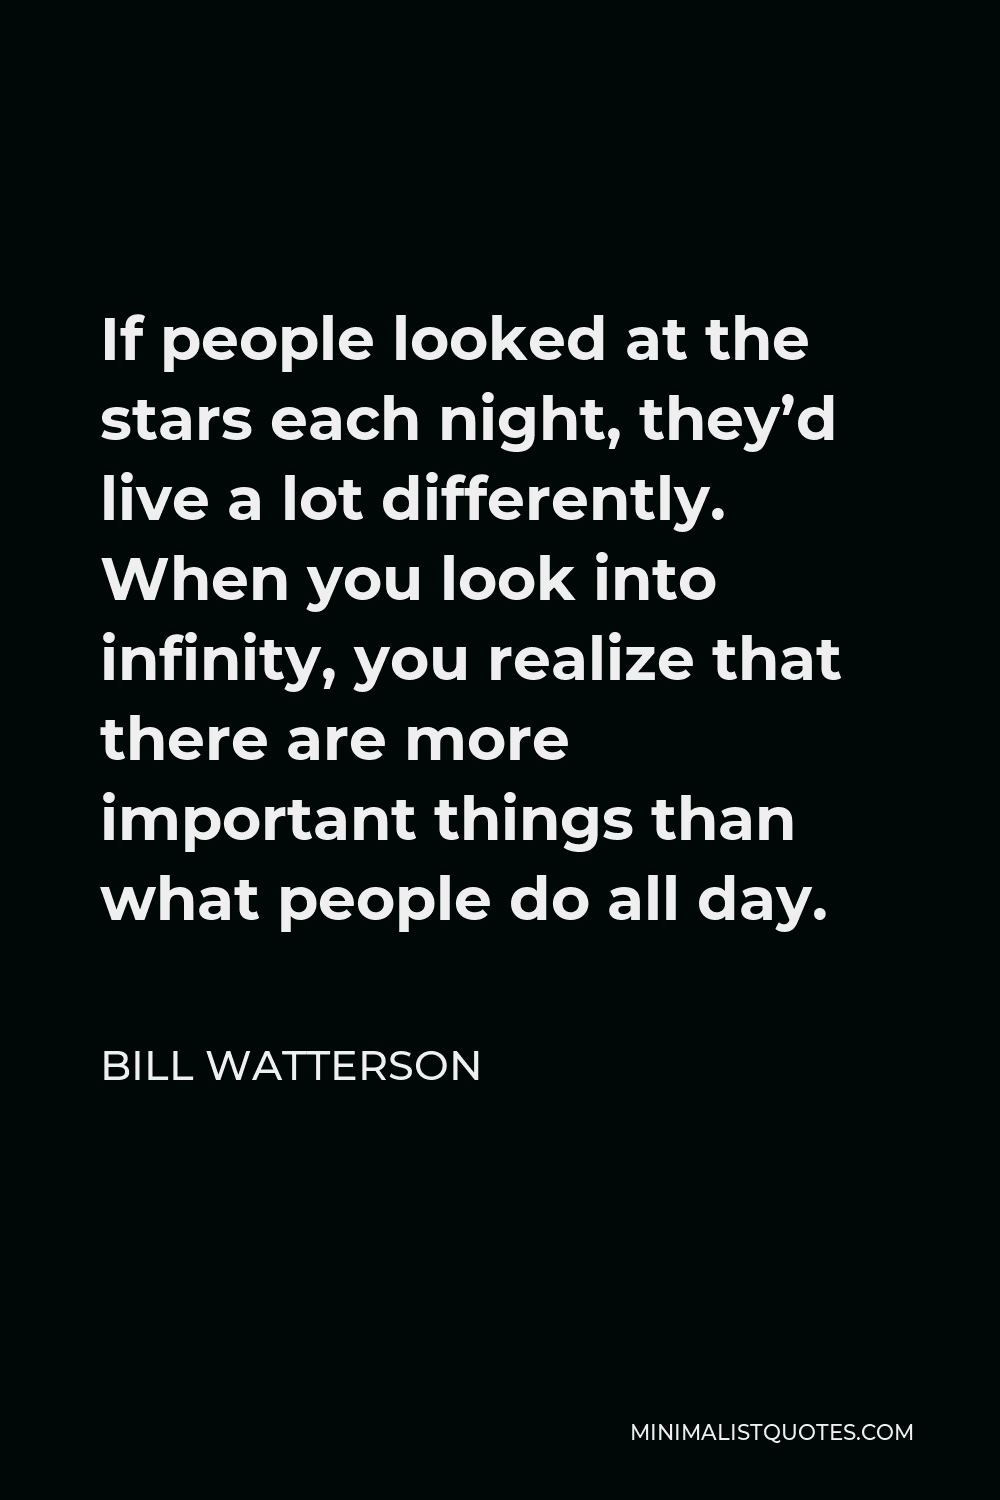 Bill Watterson Quote - If people looked at the stars each night, they’d live a lot differently. When you look into infinity, you realize that there are more important things than what people do all day.